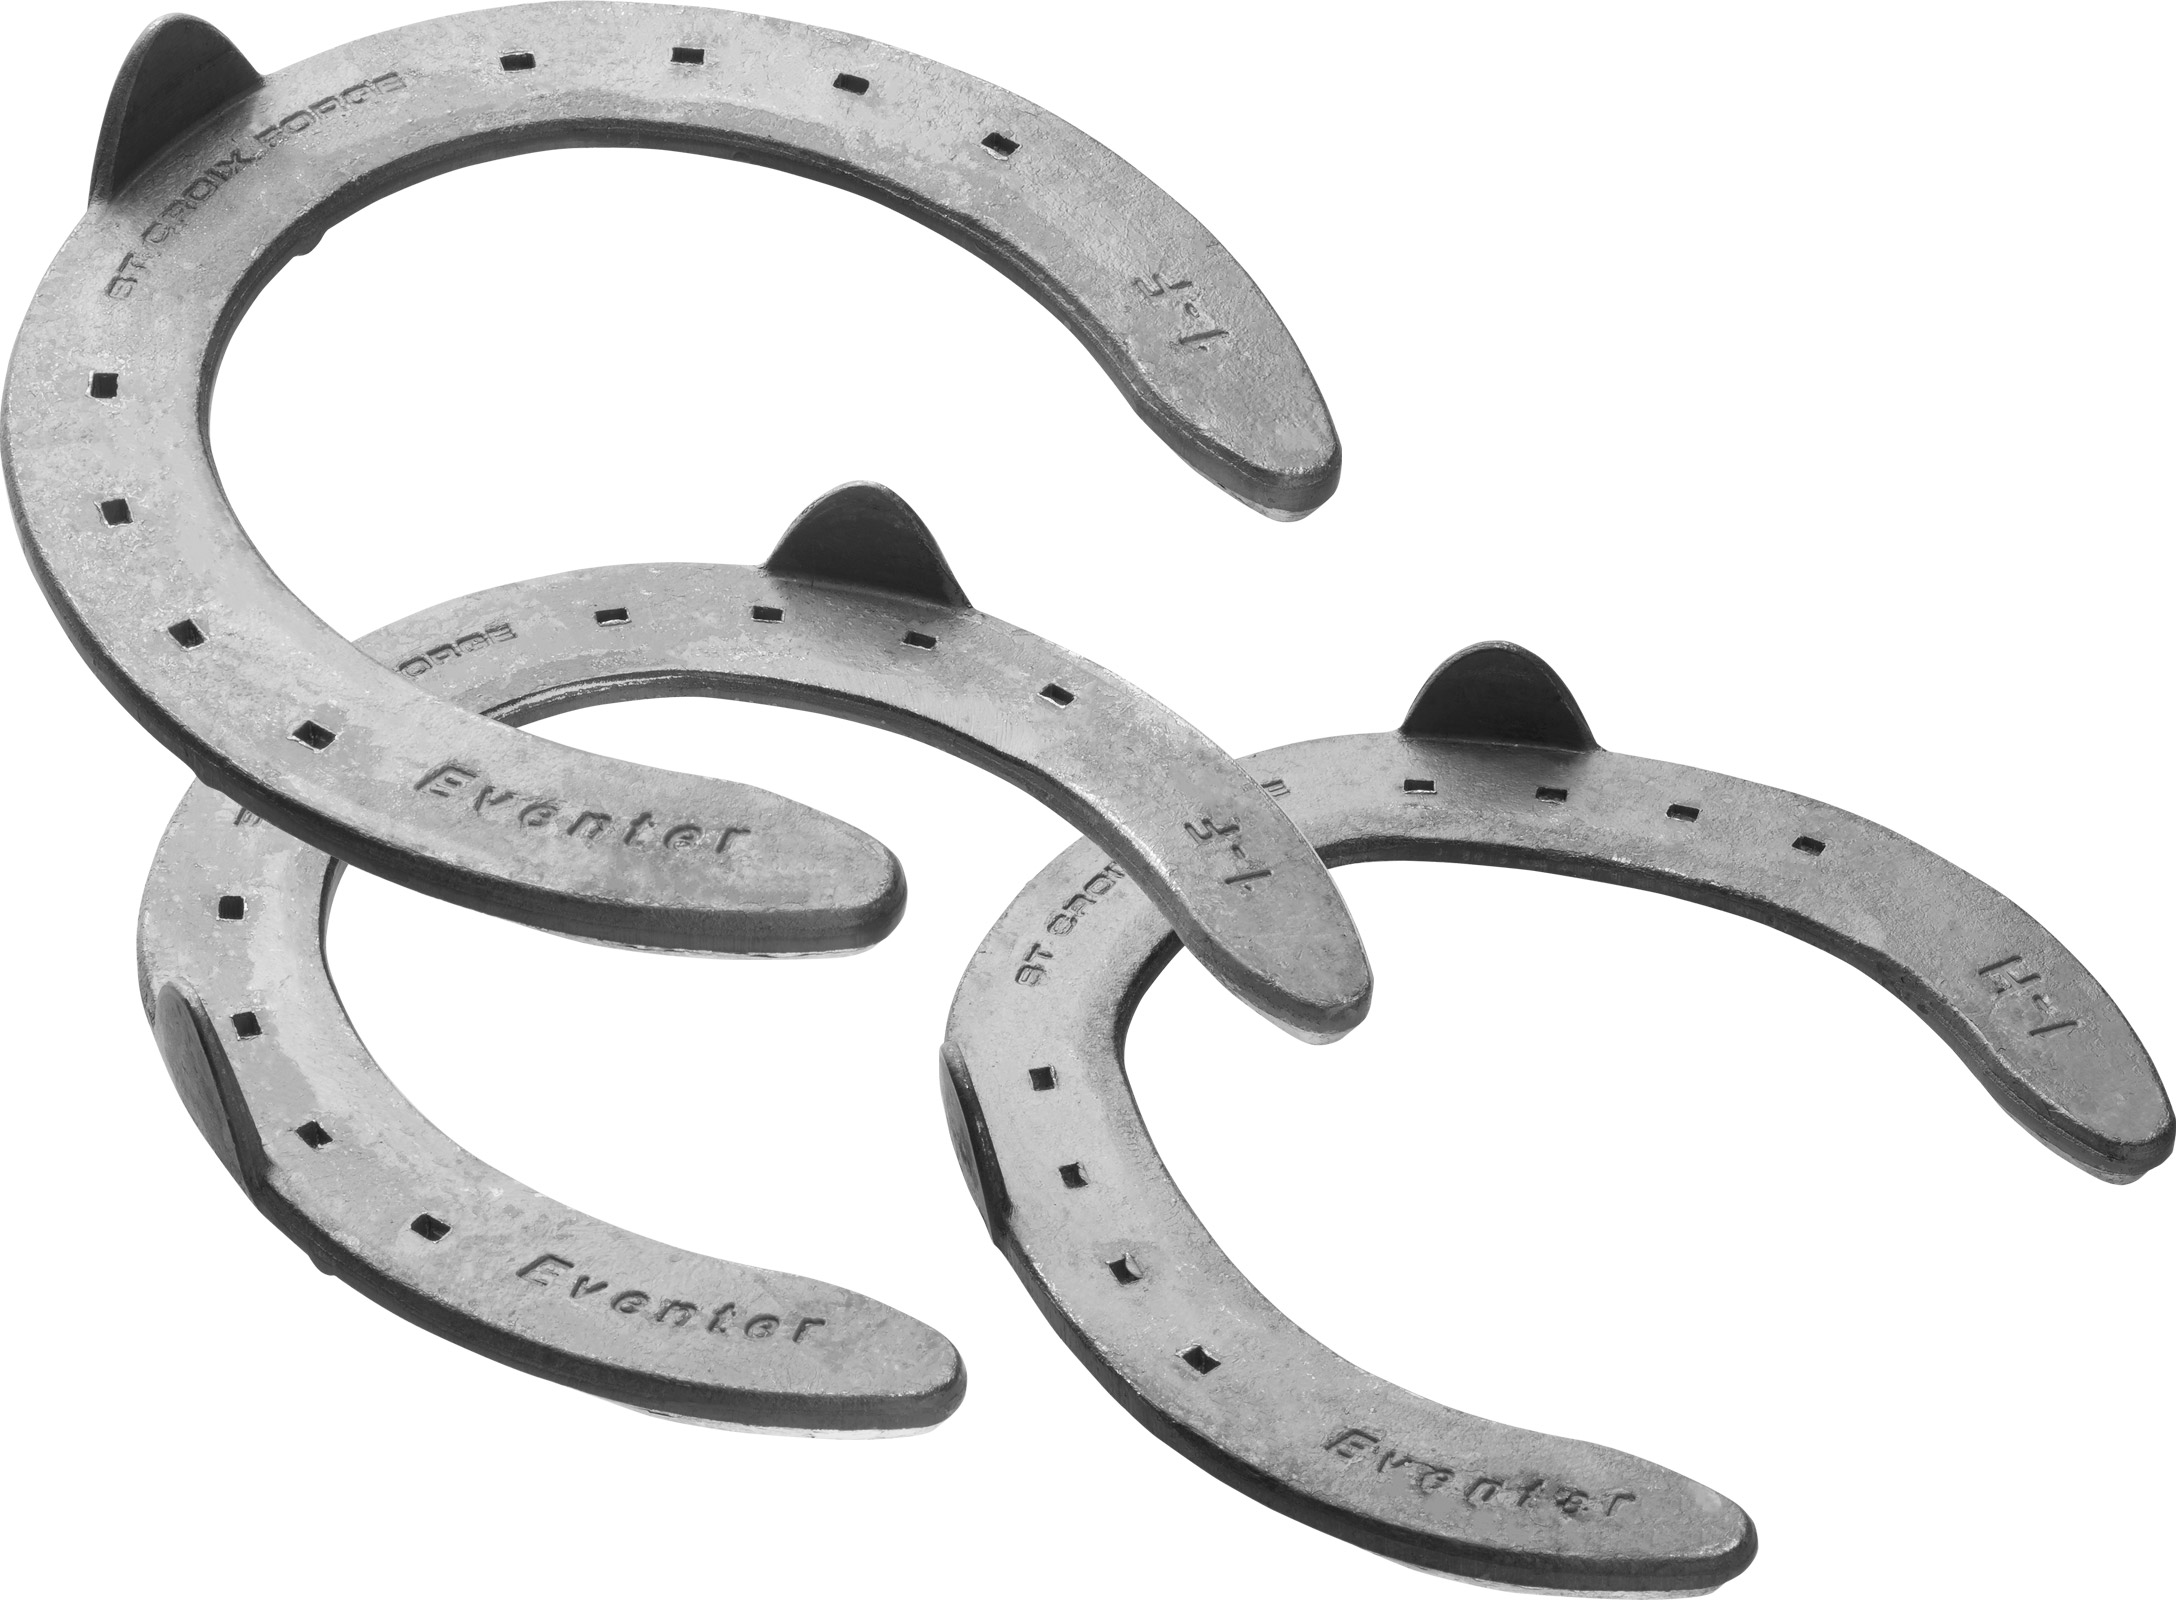 St. Croix Forge Eventer Steel horseshoes, hoof side view